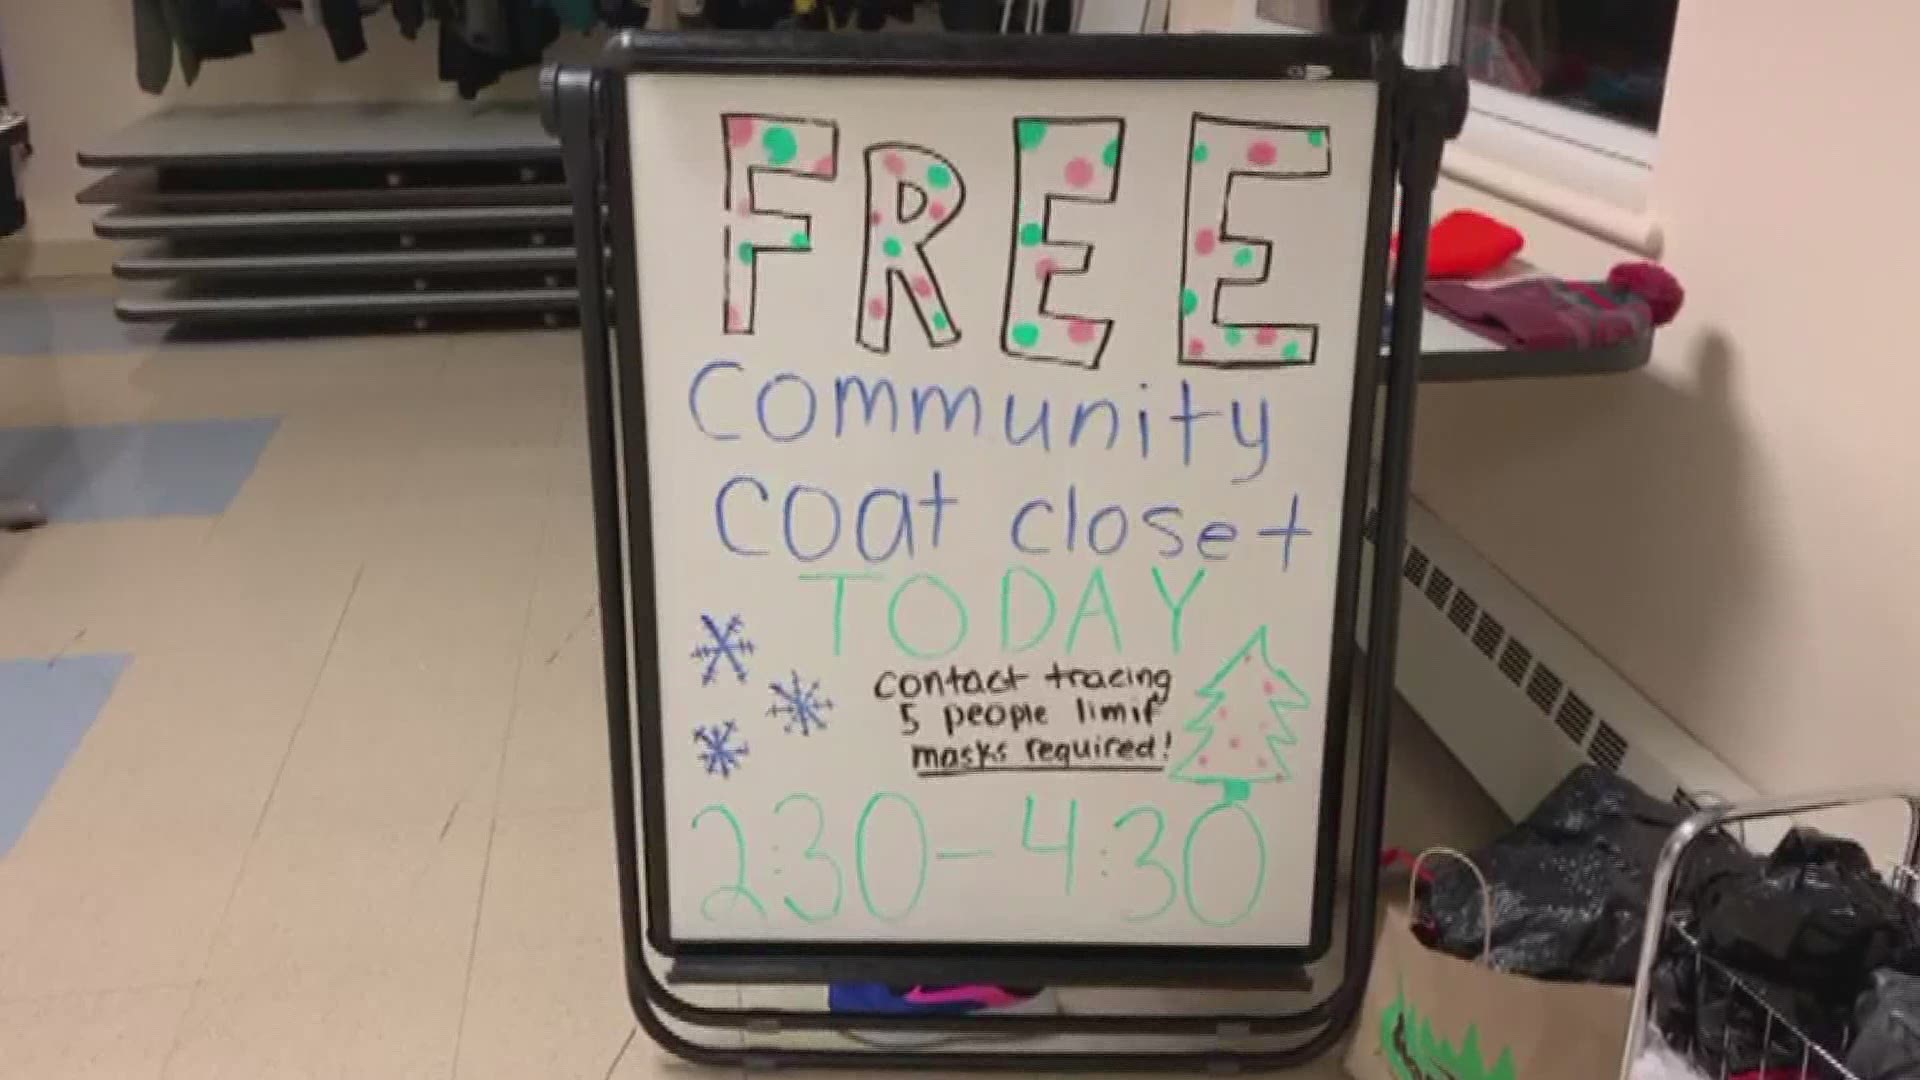 The Immaculate Conception Church in Calais has opened a free community coat closet.